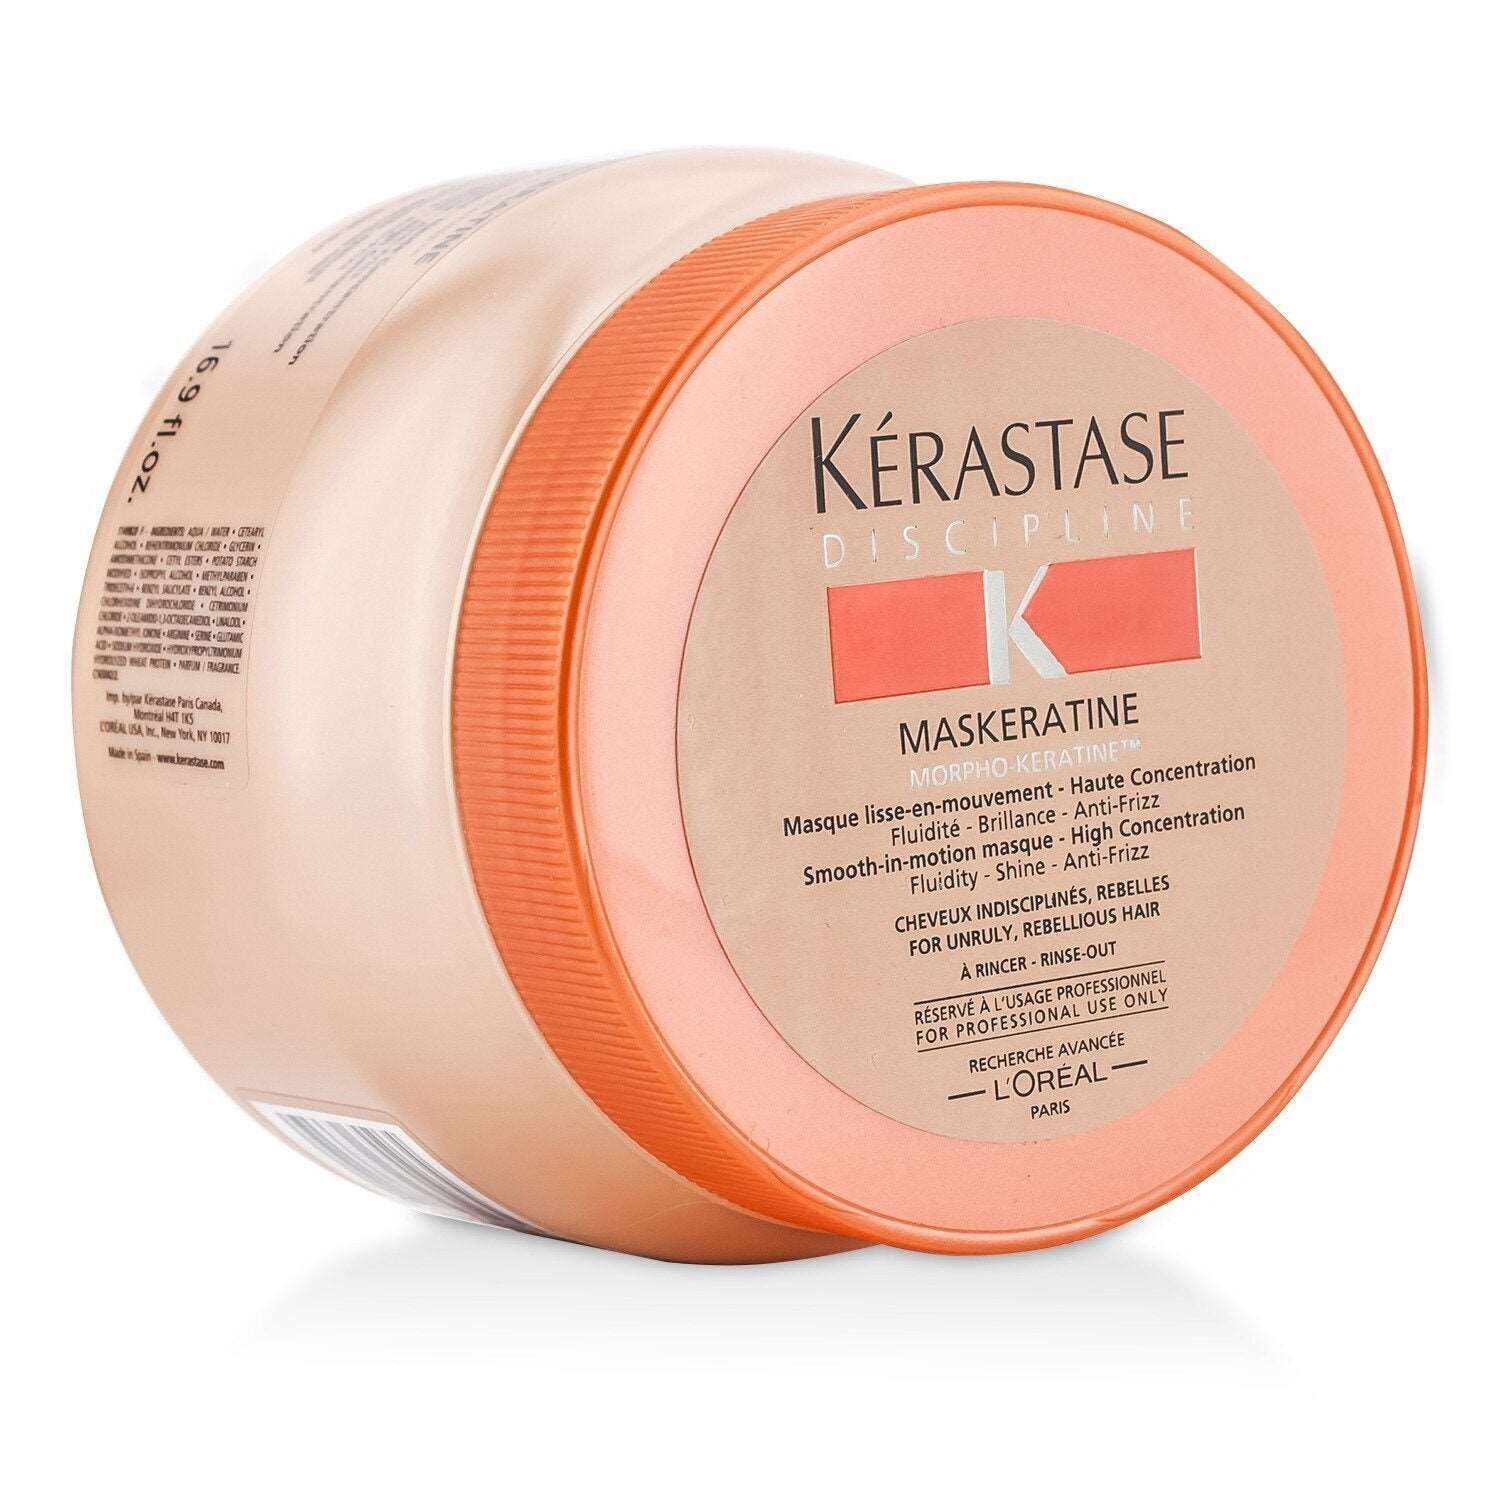 KERASTASE - Discipline Maskeratine Smooth-in-Motion Masque - High Concentration (For Unruly, Rebellious Hair) - 500ml/16.9oz 3P's Inclusive Beauty